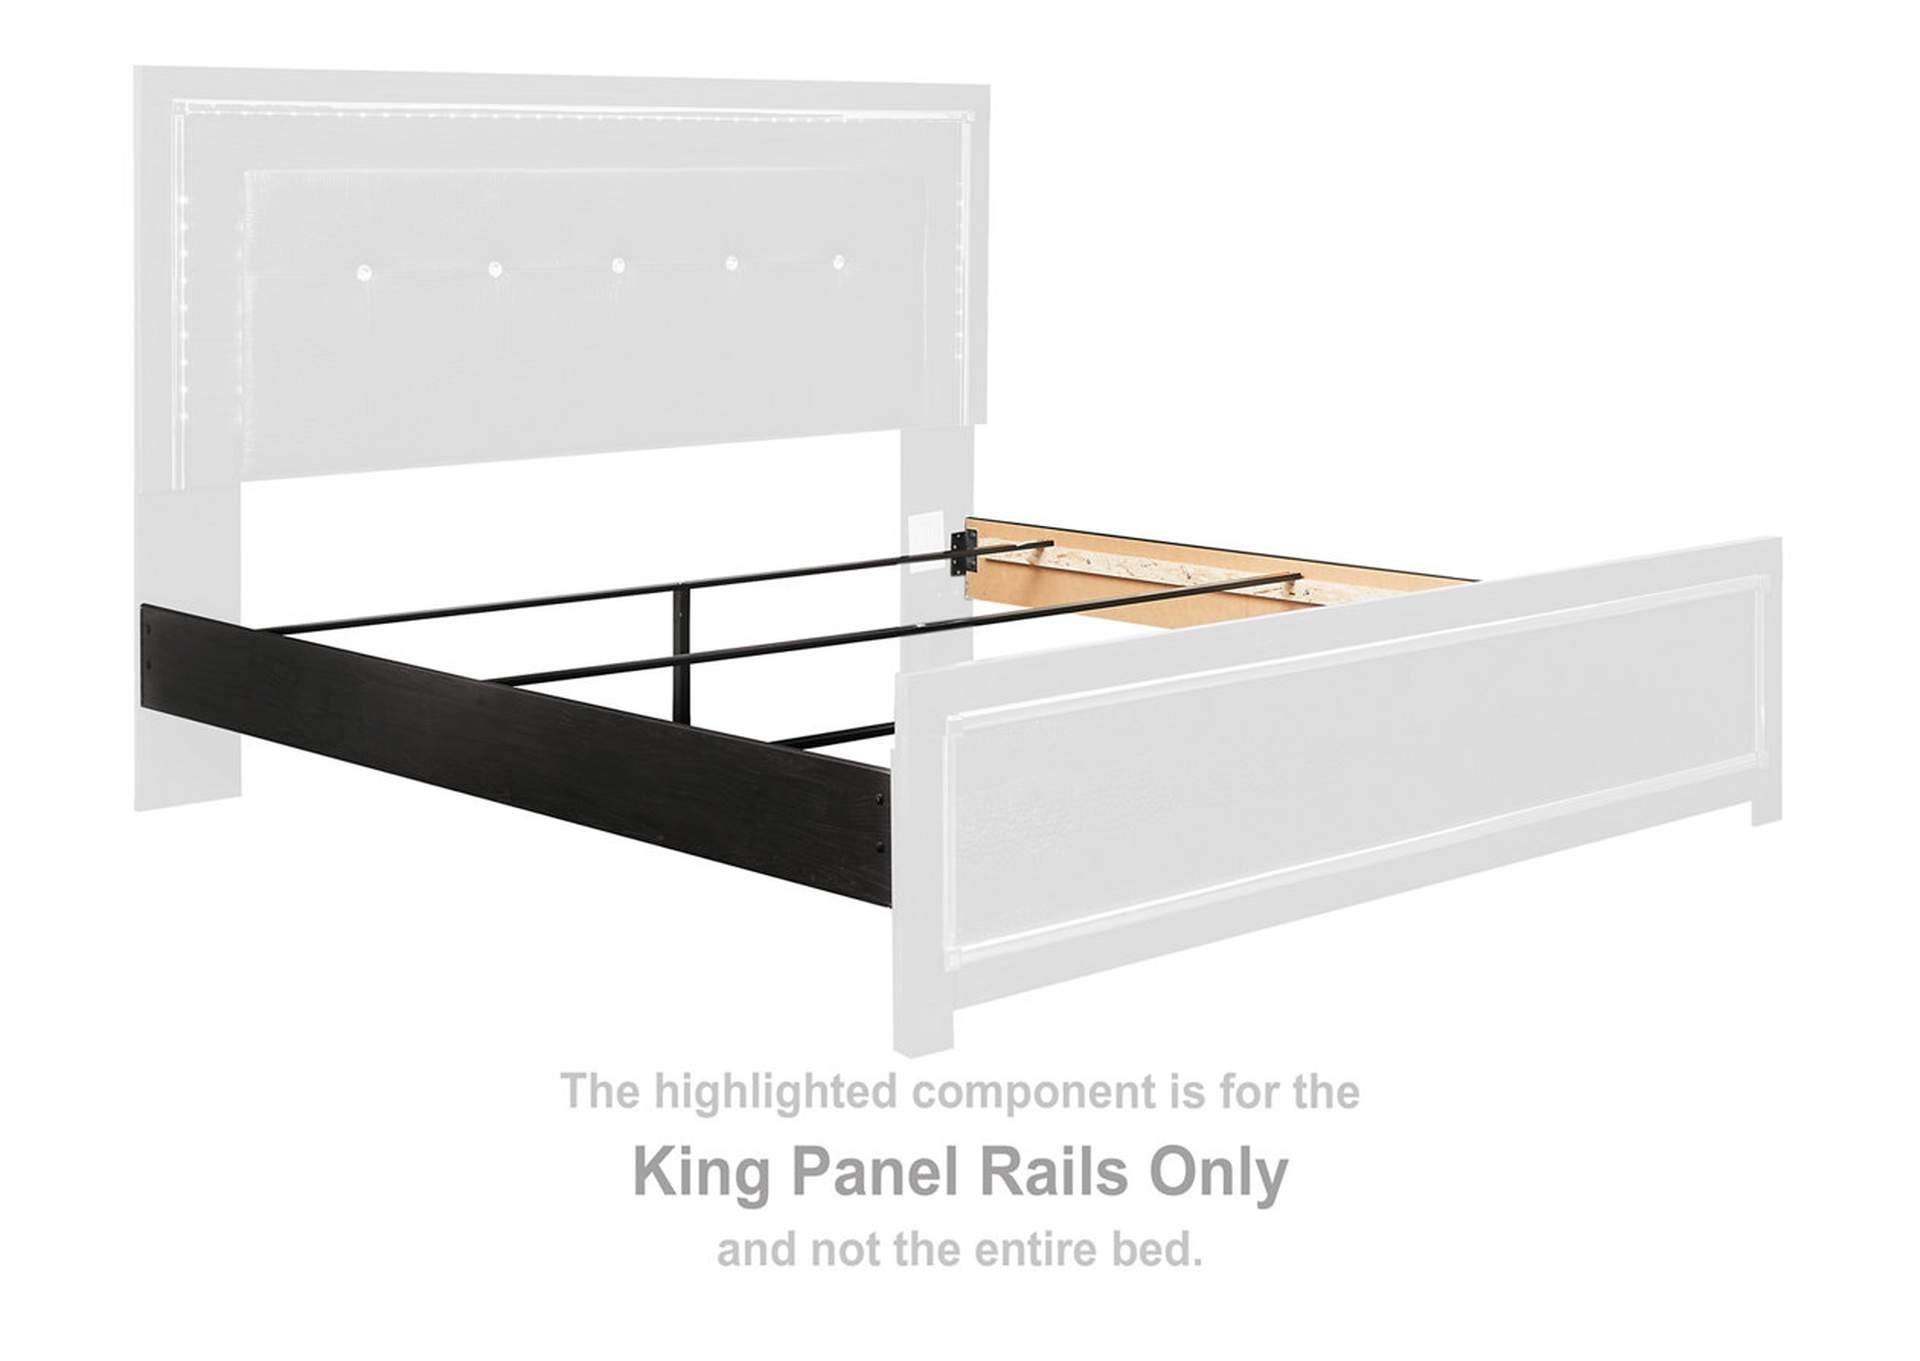 Kaydell King Panel Storage Bed, Dresser, Mirror, Chest and Nightstand,Signature Design By Ashley